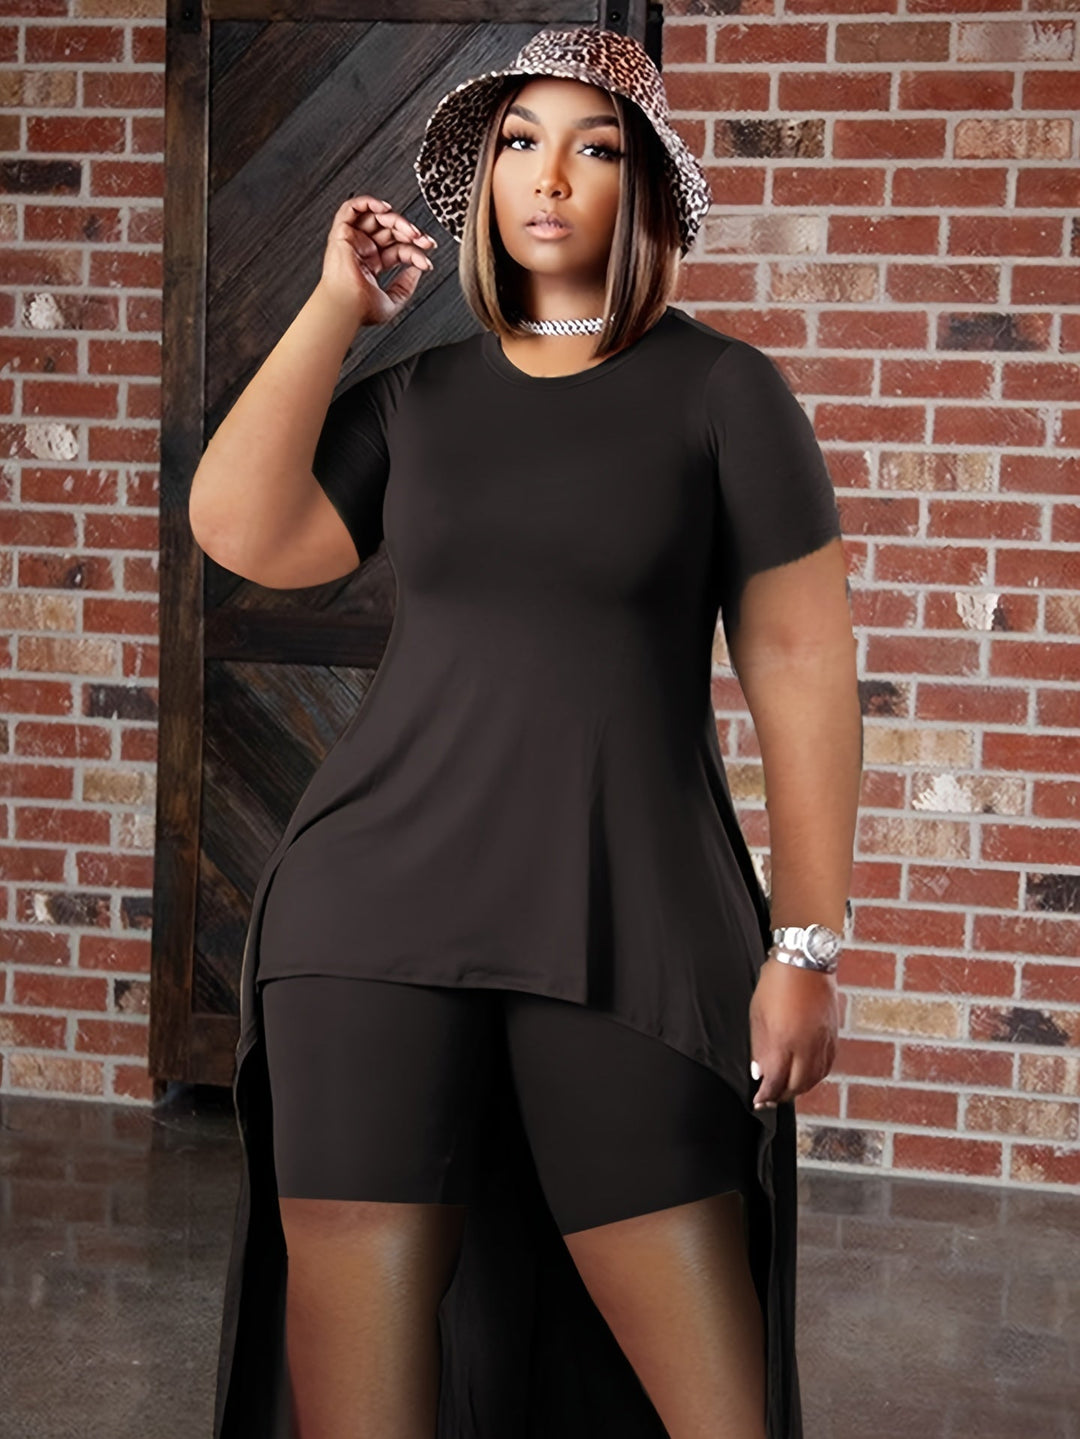 Comfy Wear Stretchy Fabric Short Sleeve Top & Shorts Gen U Us Products